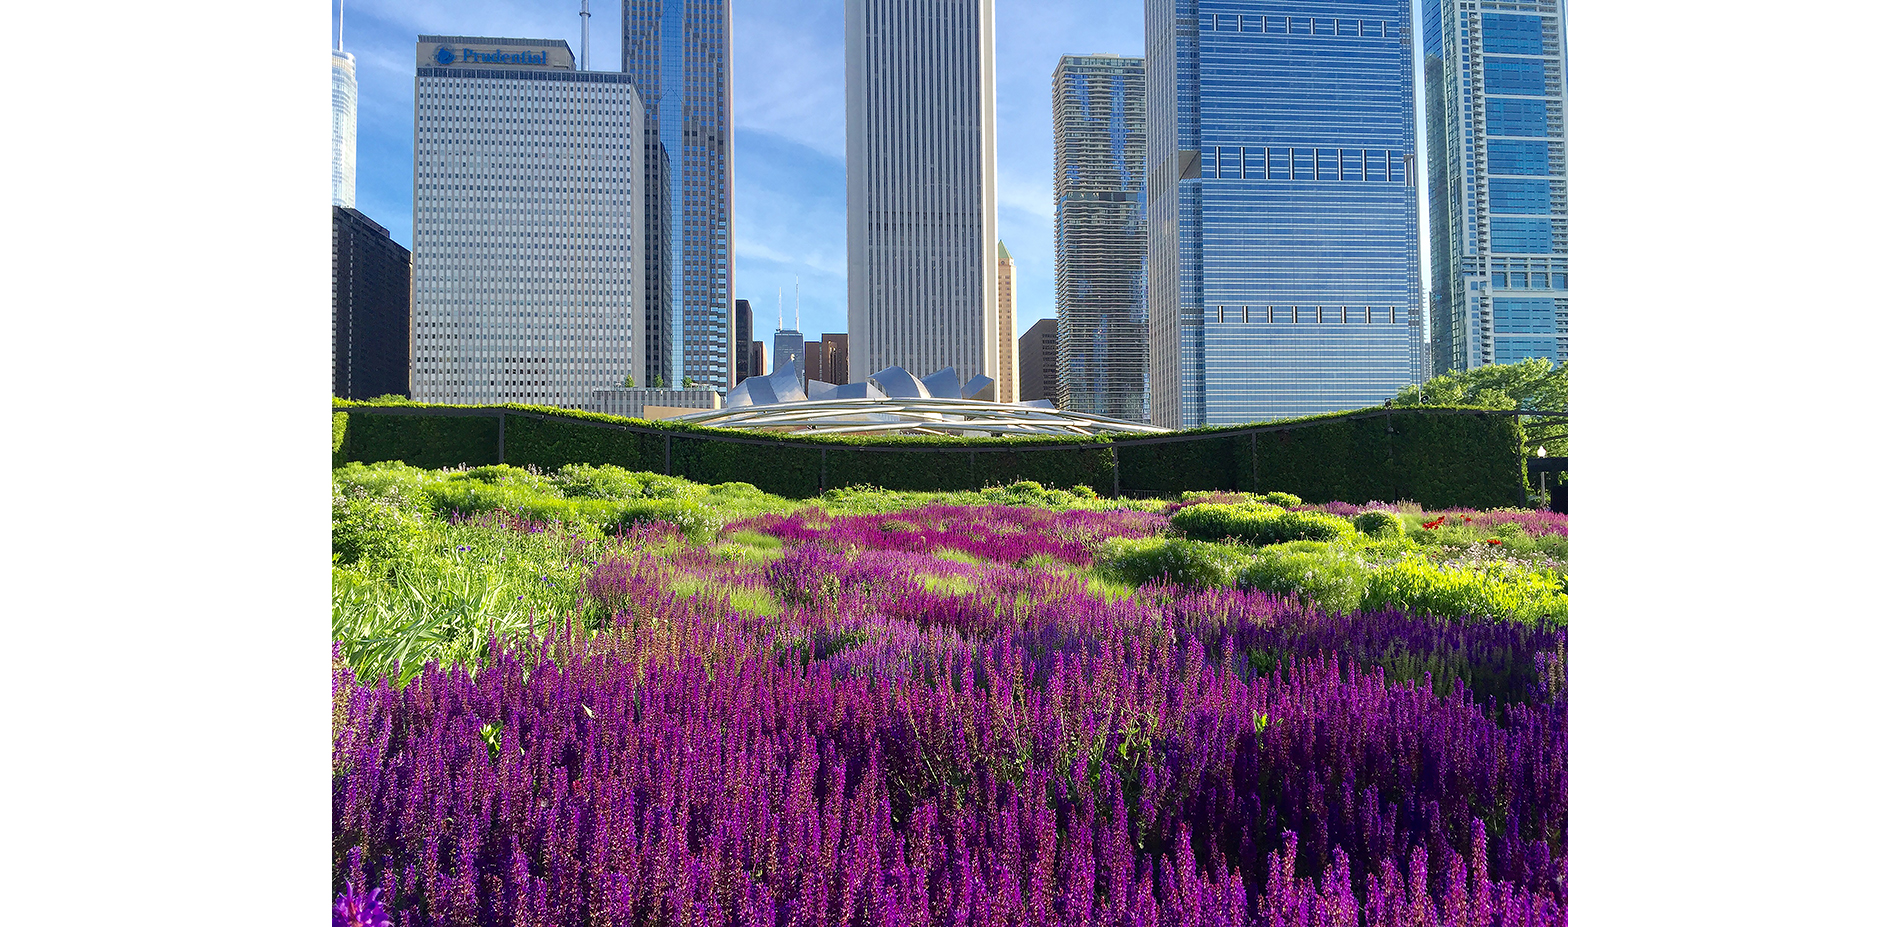 Lurie Garden's Salvia River with Jay Prtizker Pavilion in background